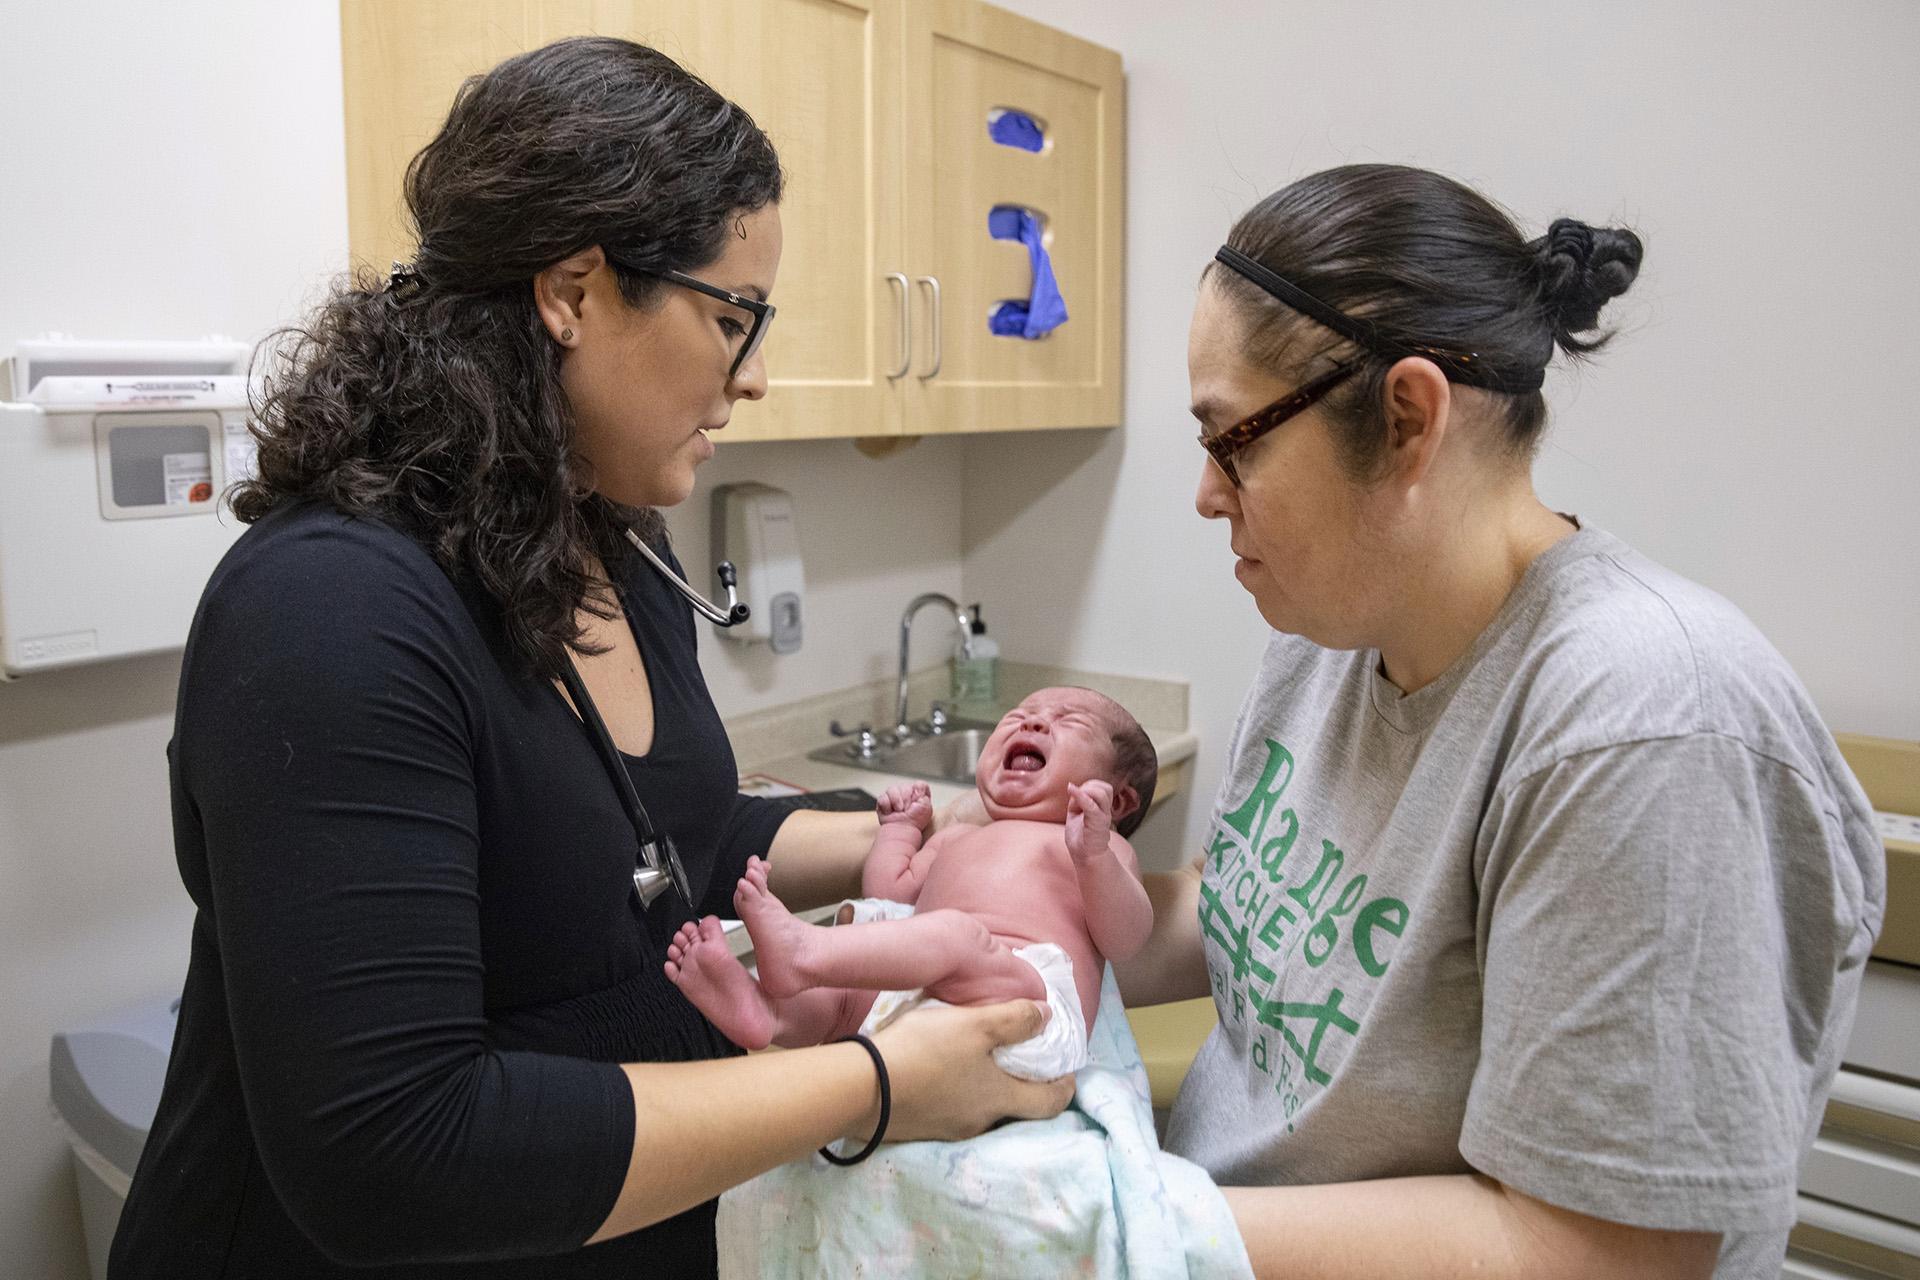 In this Aug. 13, 2019, photo, Dr. Jasmine Saavedra, left, a pediatrician at Esperanza Health Centers in Chicago, hands newborn Alondra Marquez to her mother, Esthela Nuñez, right, after examination. (AP Photo / Amr Alfiky)